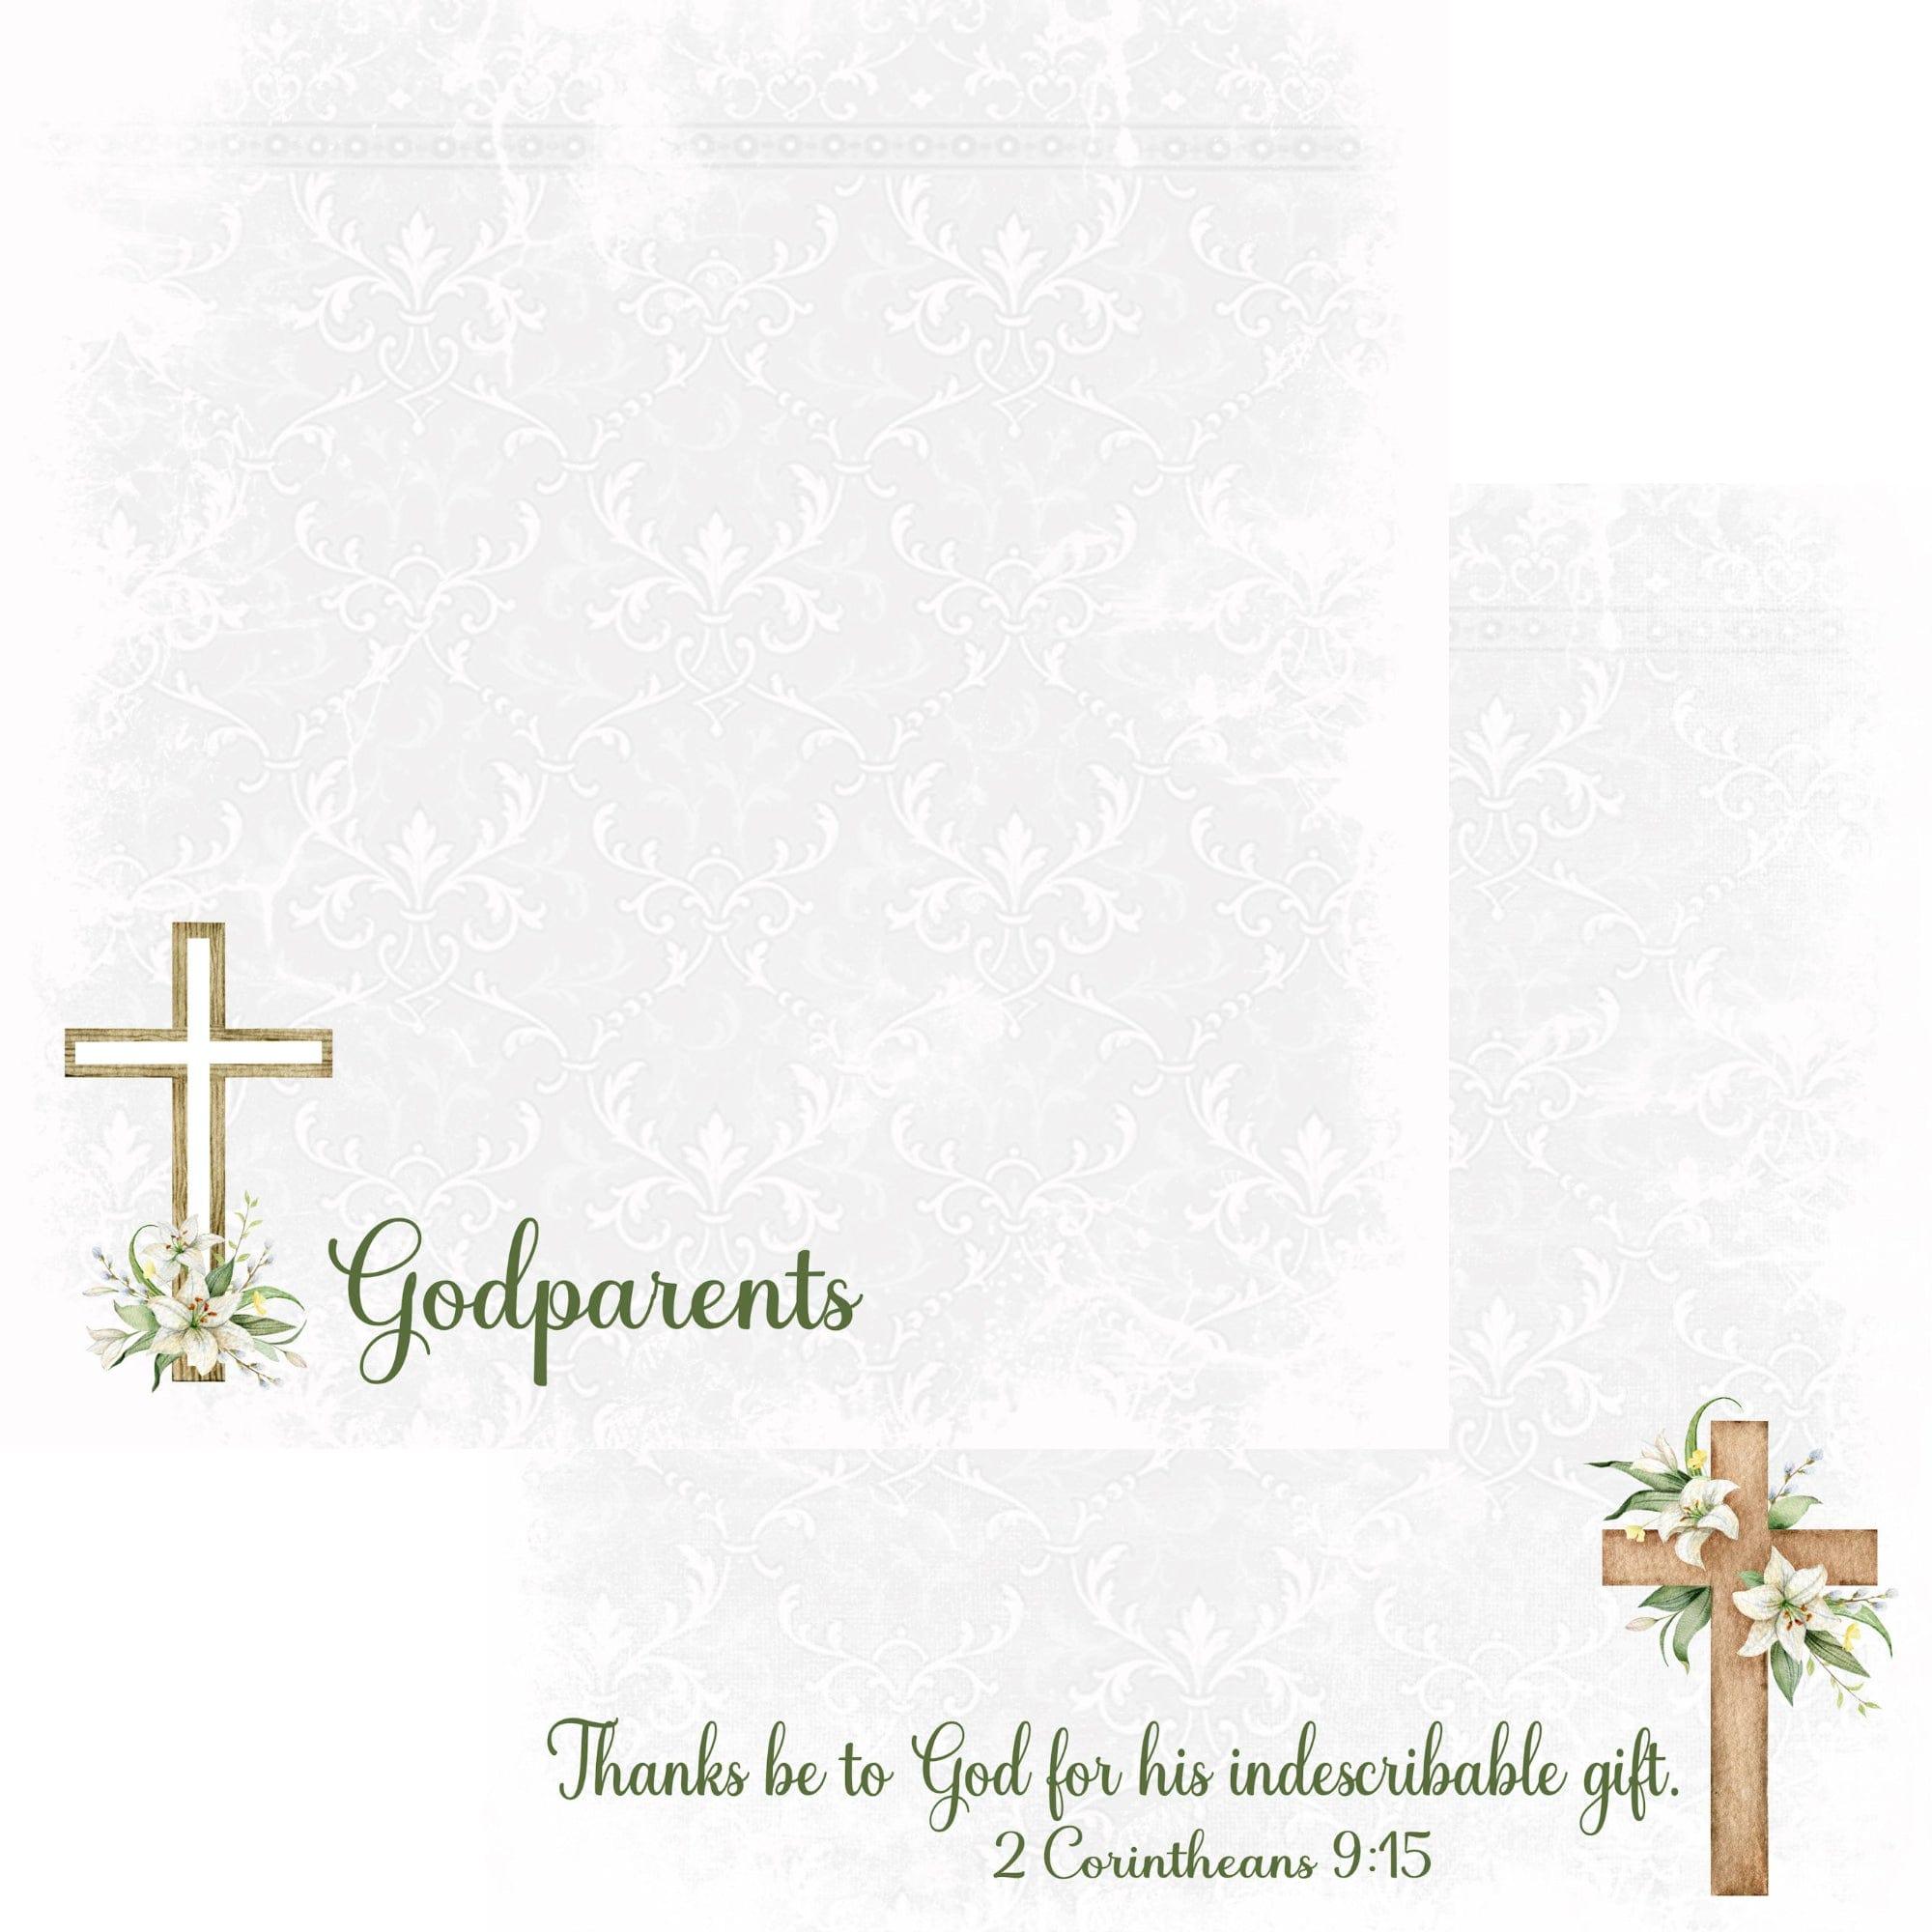 Holy Sacraments Collection Godparents 12 x 12 Double-Sided Scrapbook Paper by SSC Designs